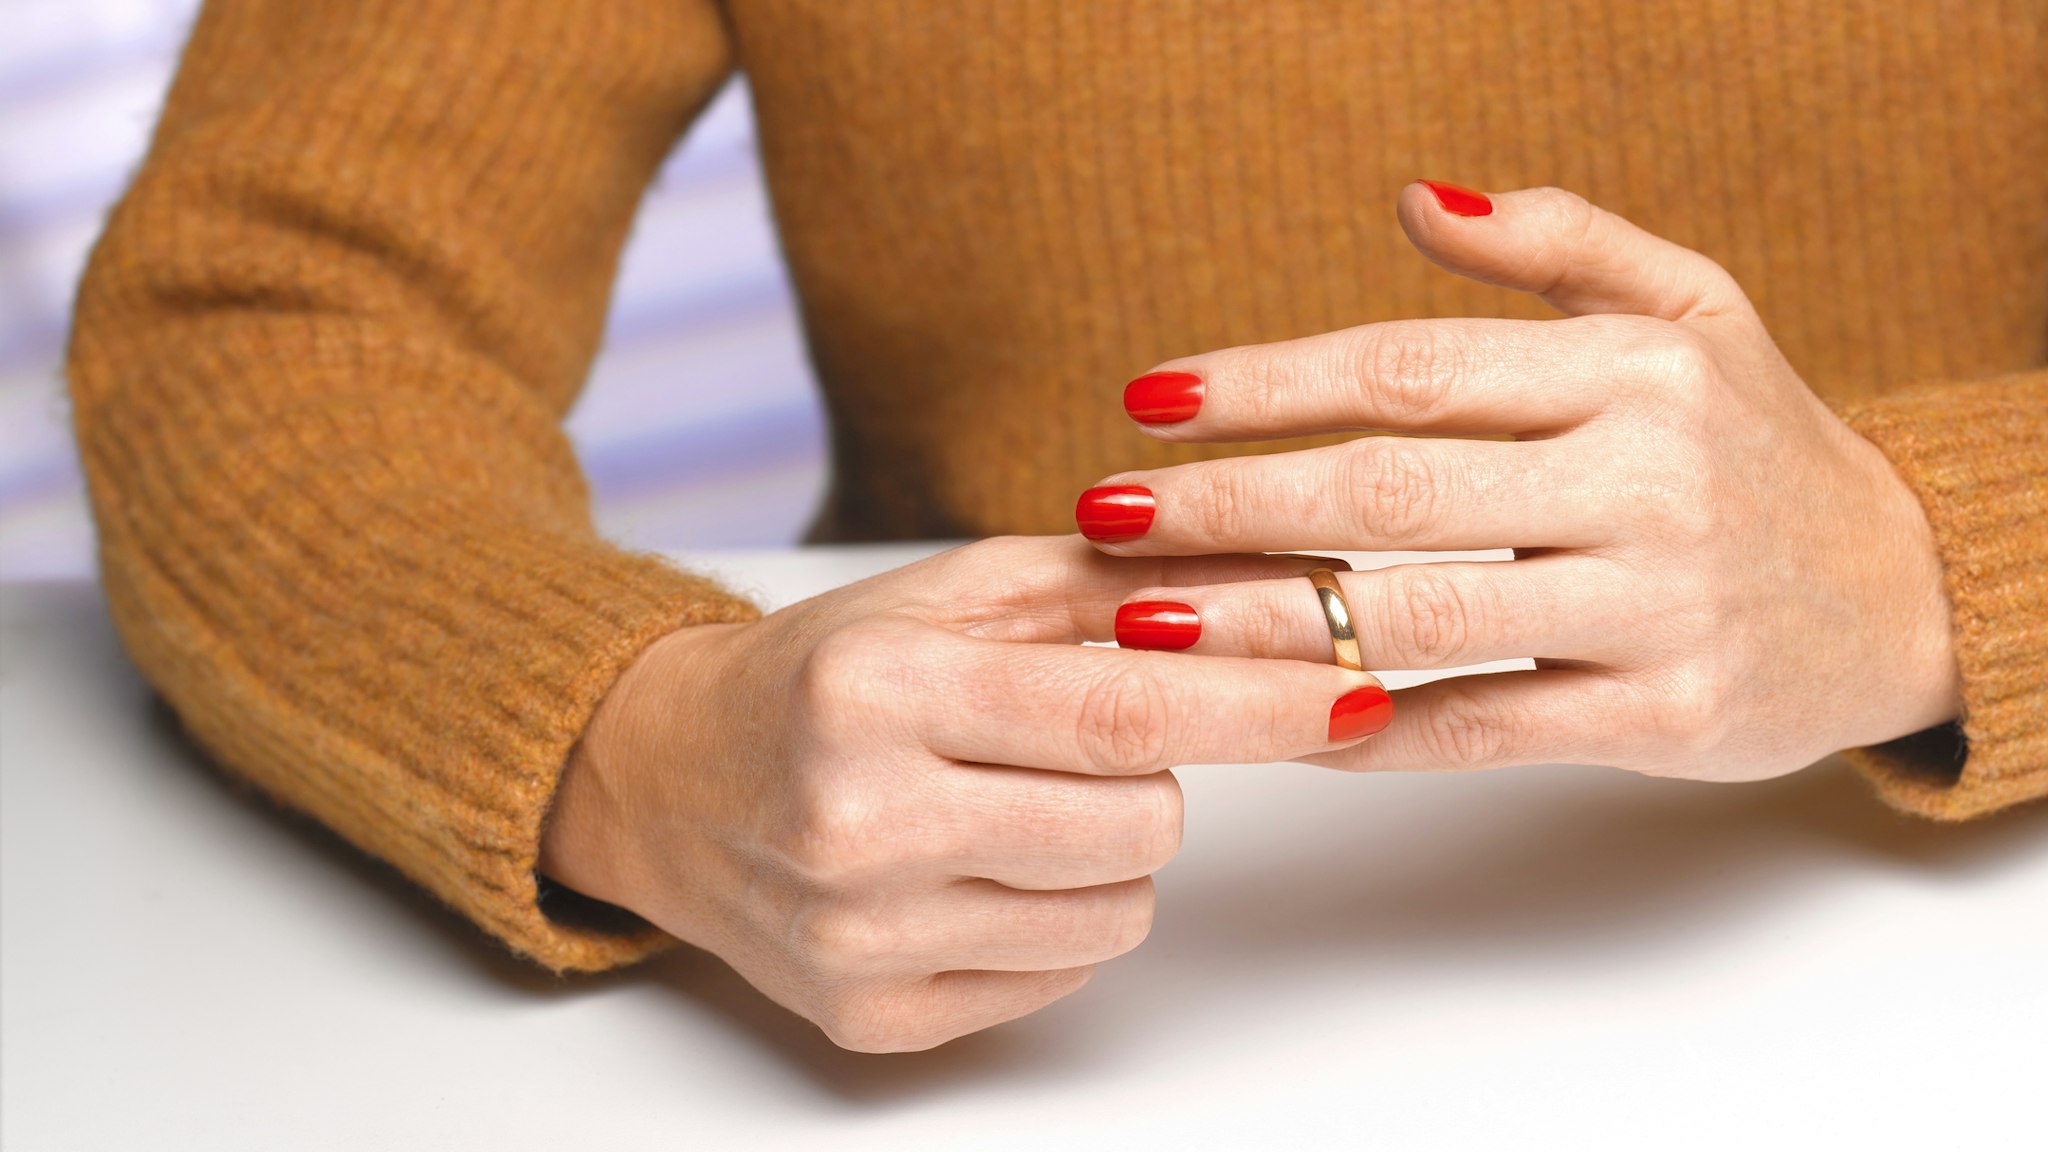 Divorced woman taking off wedding ring - stock photo